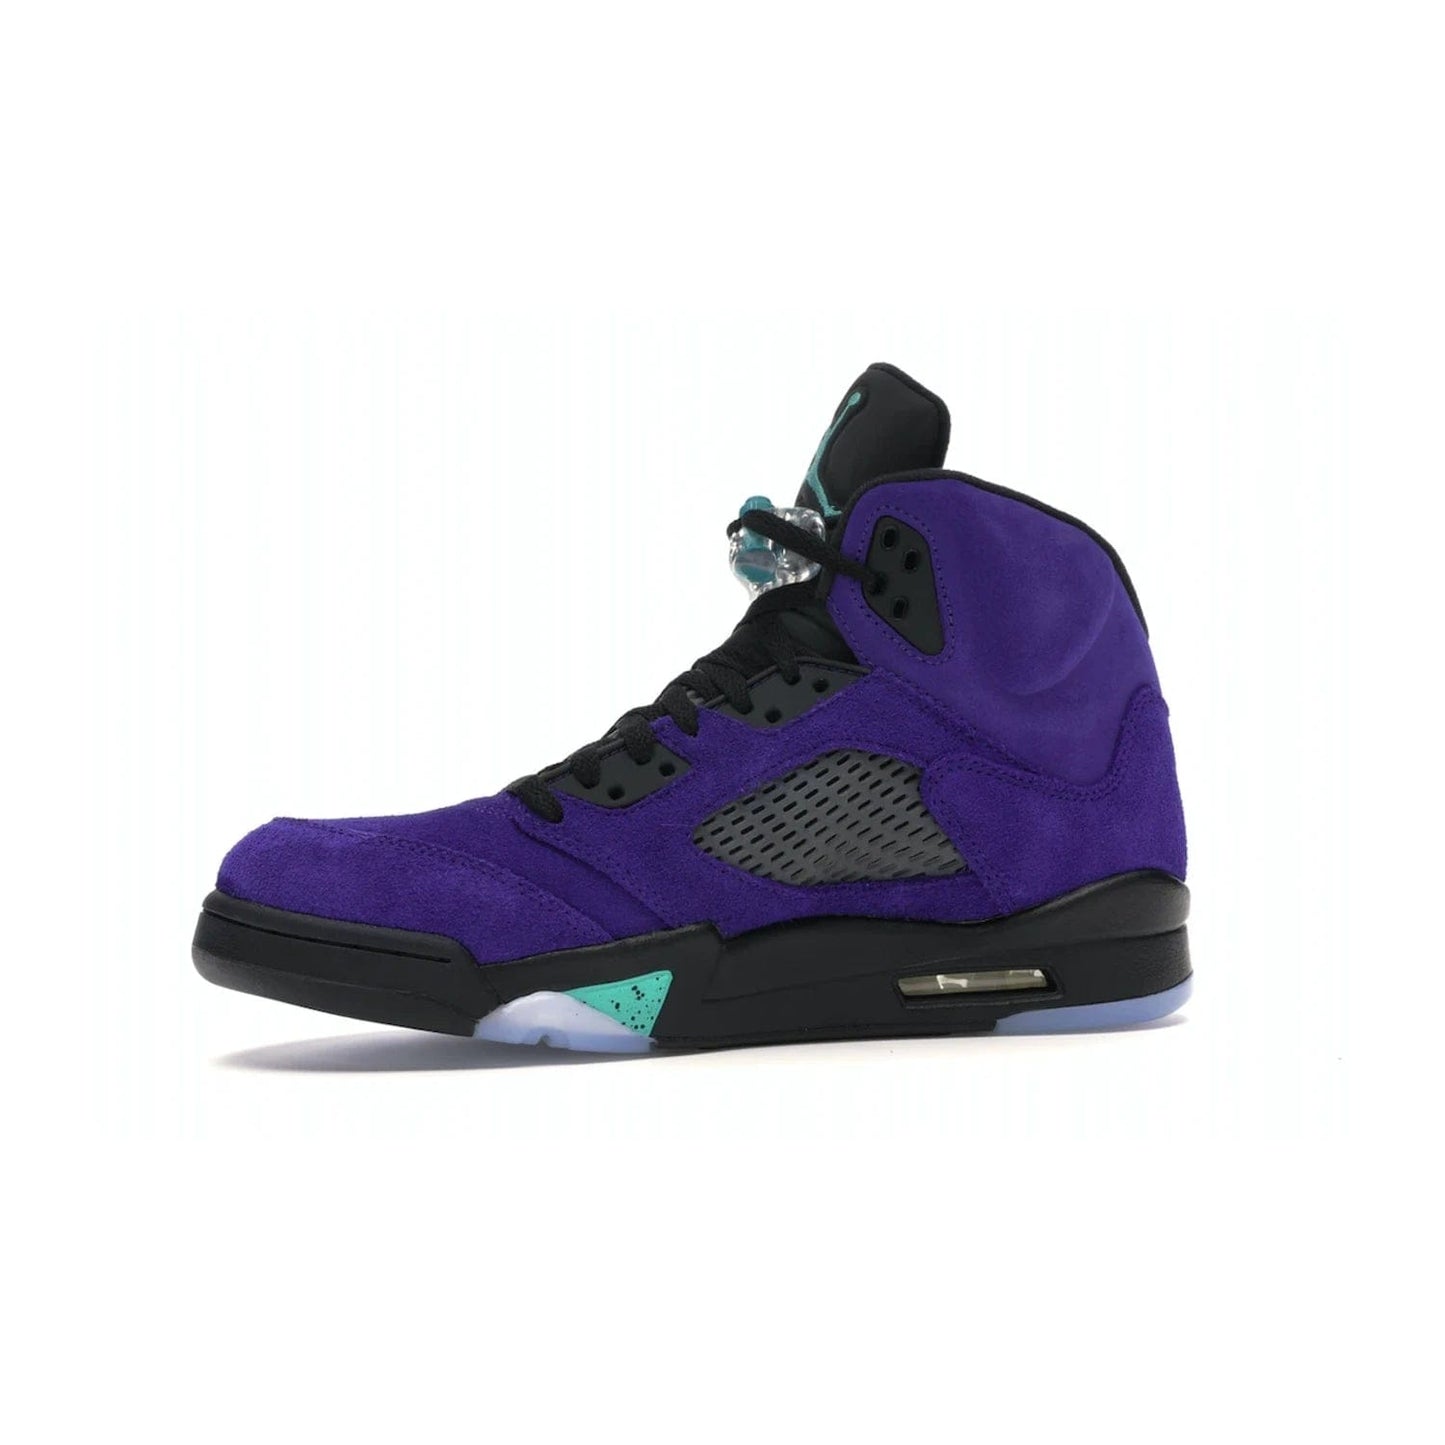 Jordan 5 Retro Alternate Grape - Image 17 - Only at www.BallersClubKickz.com - Bring the classic Jordan 5 Retro Alternate Grape to your sneaker collection! Featuring a purple suede upper, charcoal underlays, green detailing, and an icy and green outsole. Releasing for the first time since 1990, don't miss this chance to add a piece of sneaker history to your collection.